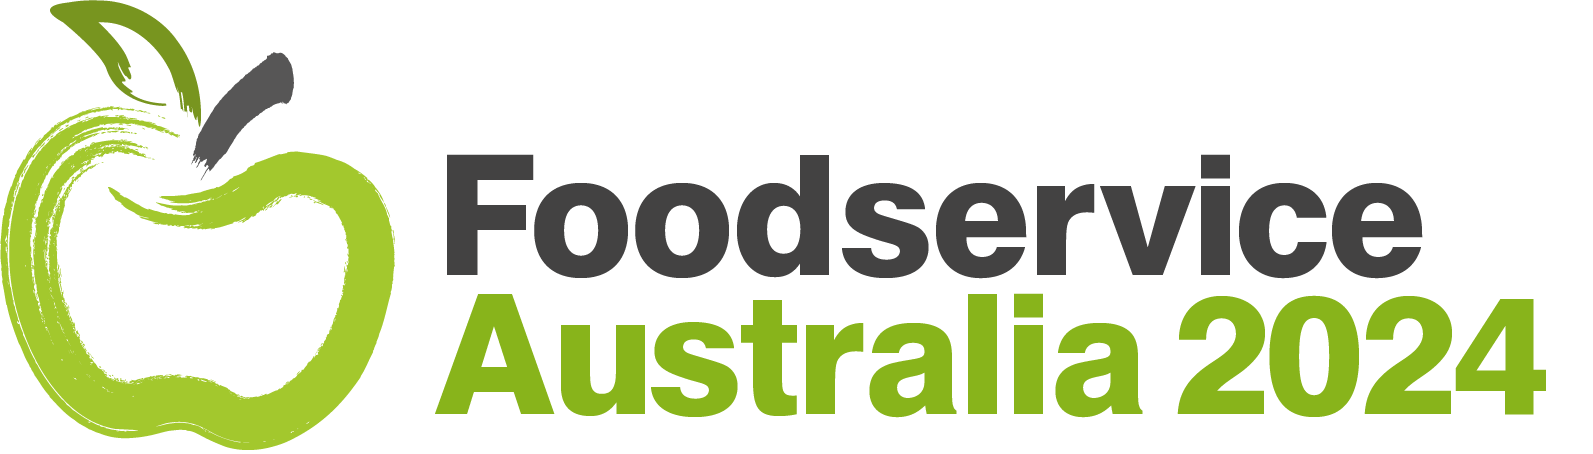 https://www.hospitalitydirectory.com.au/images/product_images/Mission/product_news_images/2024/2024May14_Foodservice/FSA.png